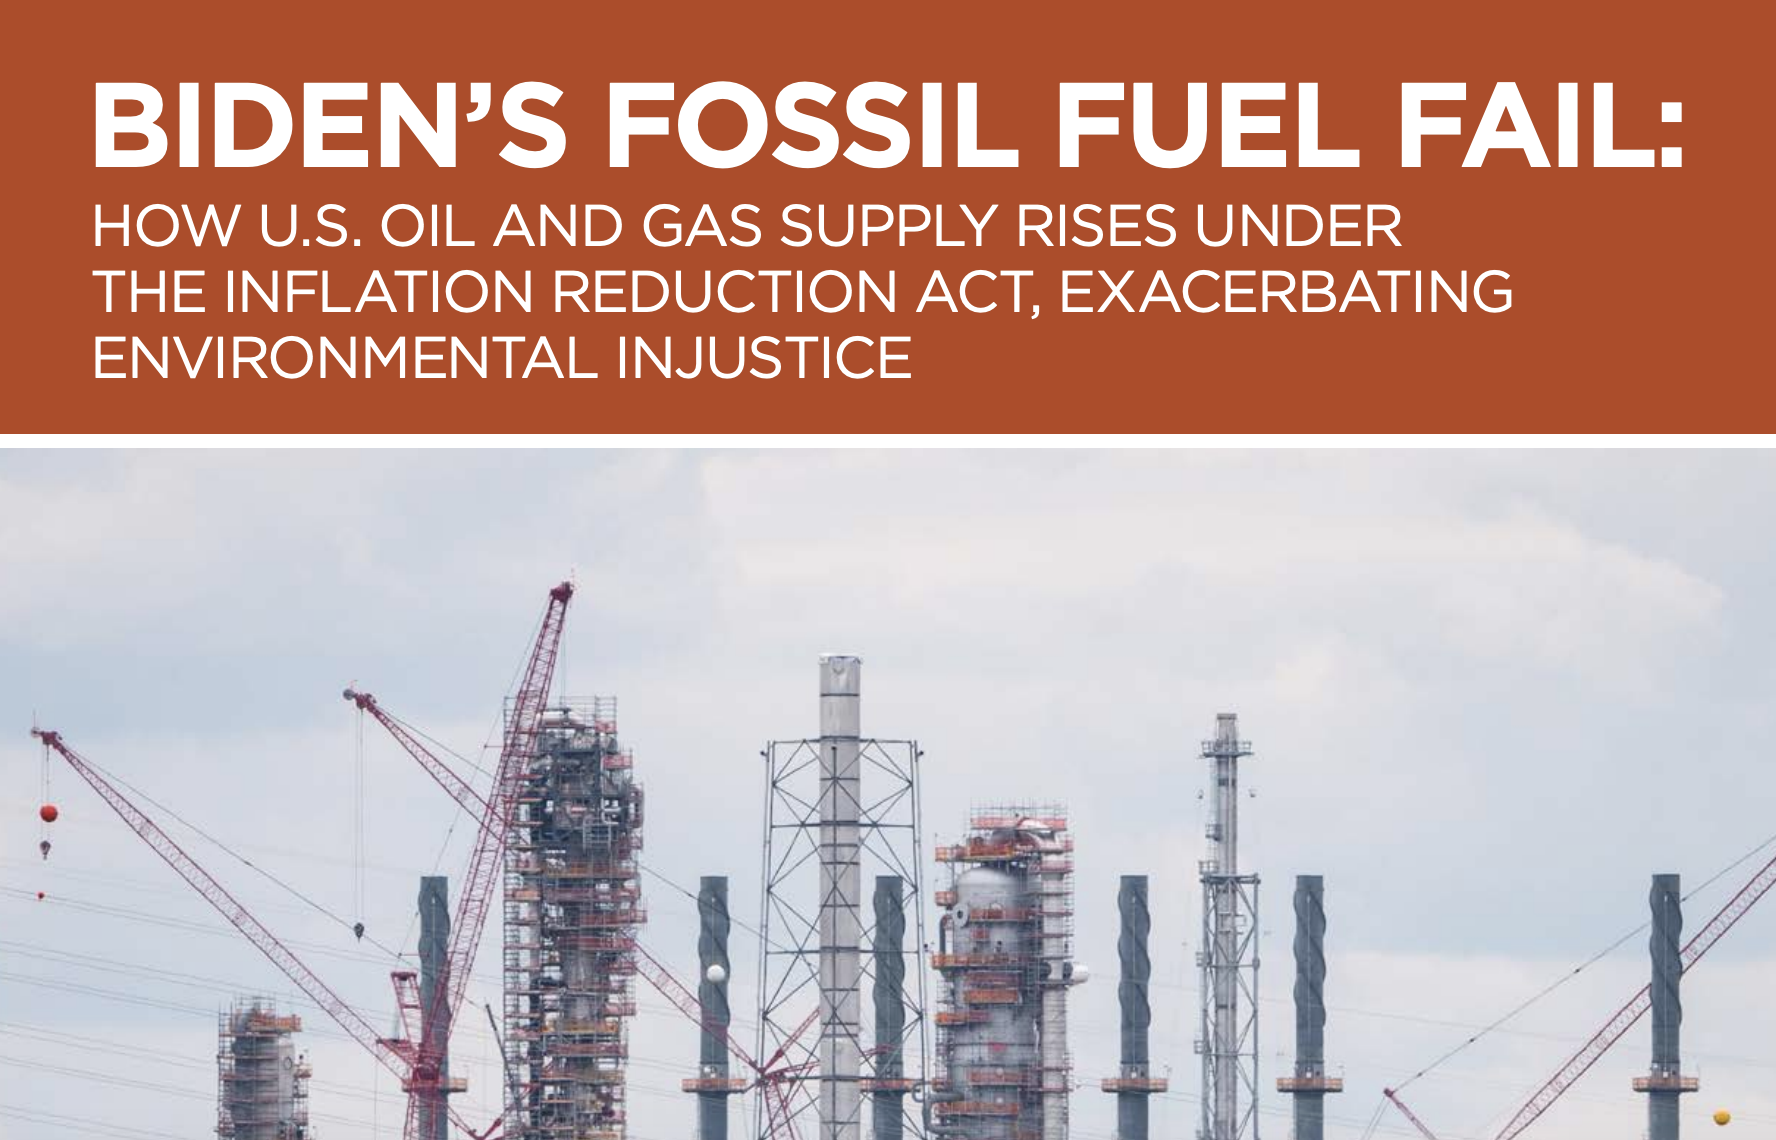 Biden’s Fossil Fuel Fail: How U.S. Oil & Gas Supply Rises under the Inflation Reduction Act